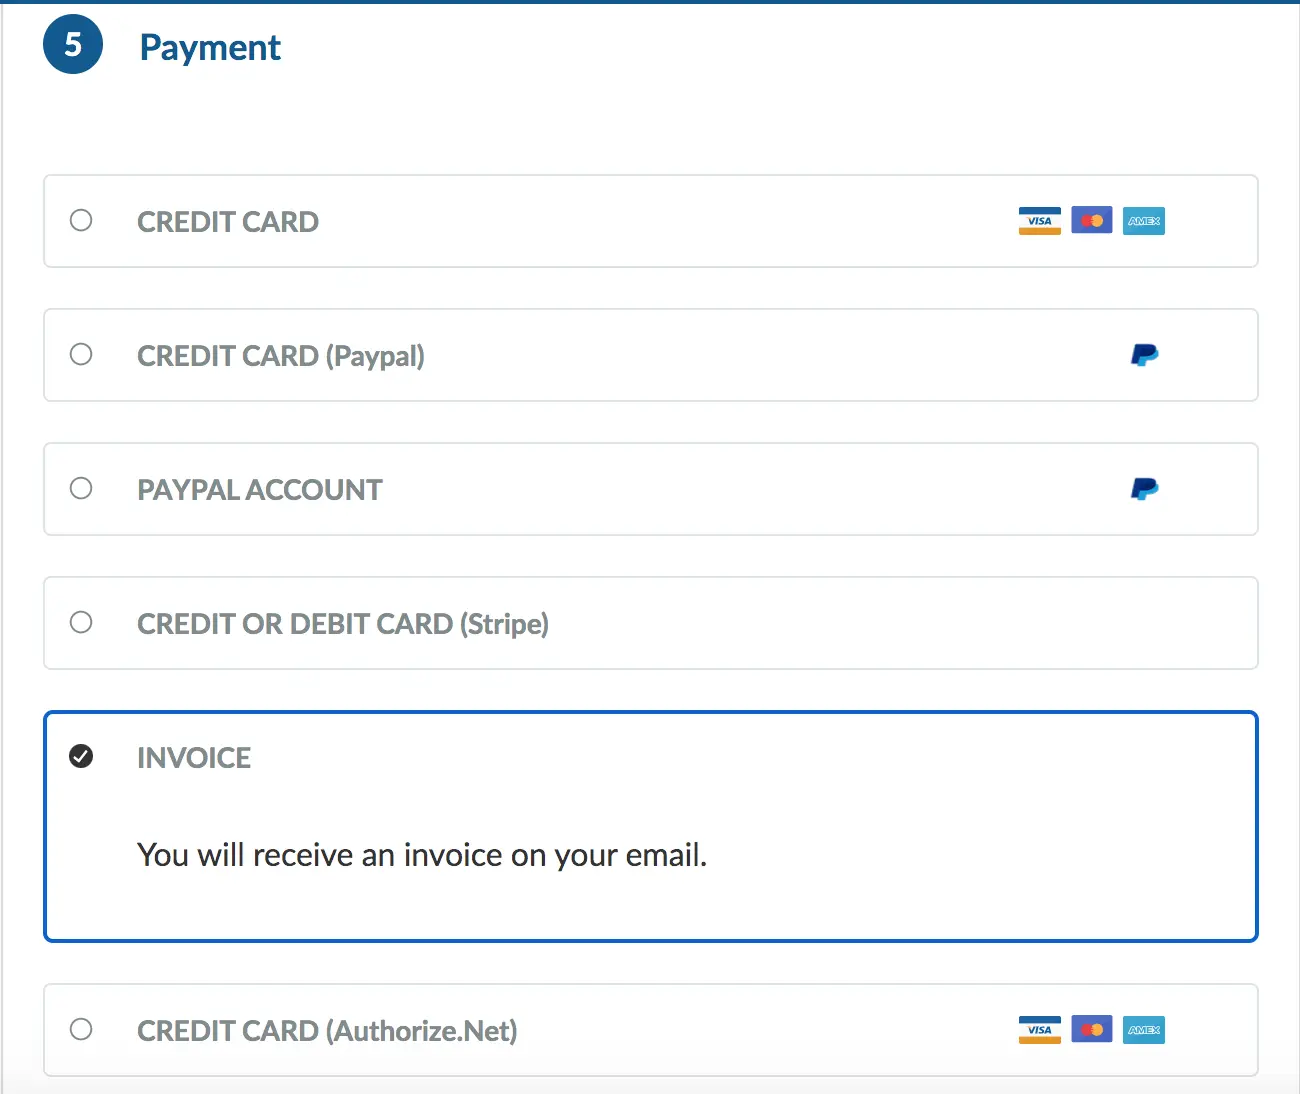 Image showing the Payment section of the Purchase Form